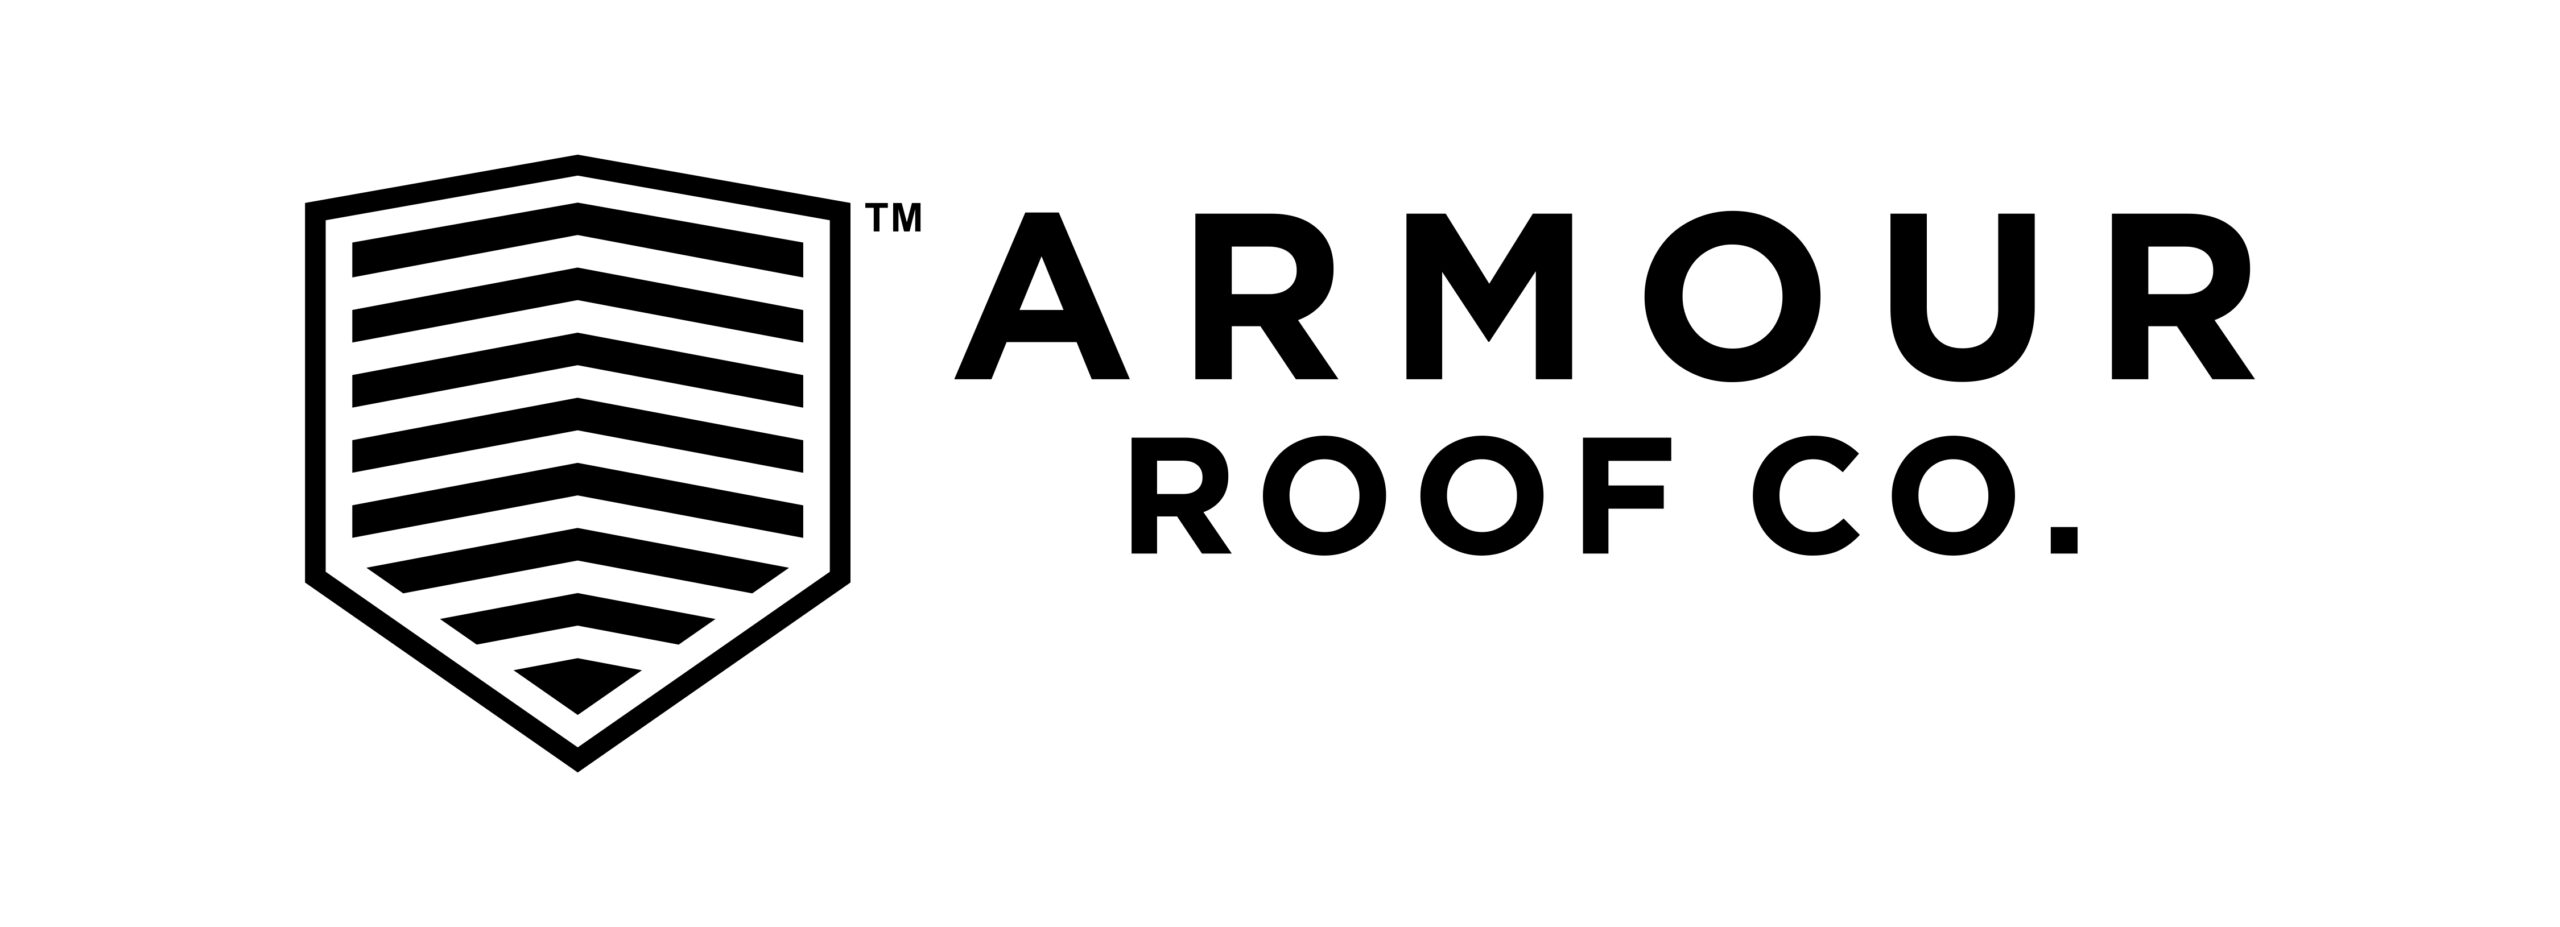 Industrial Roofers Omaha | Commercial Roofers Omaha | Armour Roof Co.